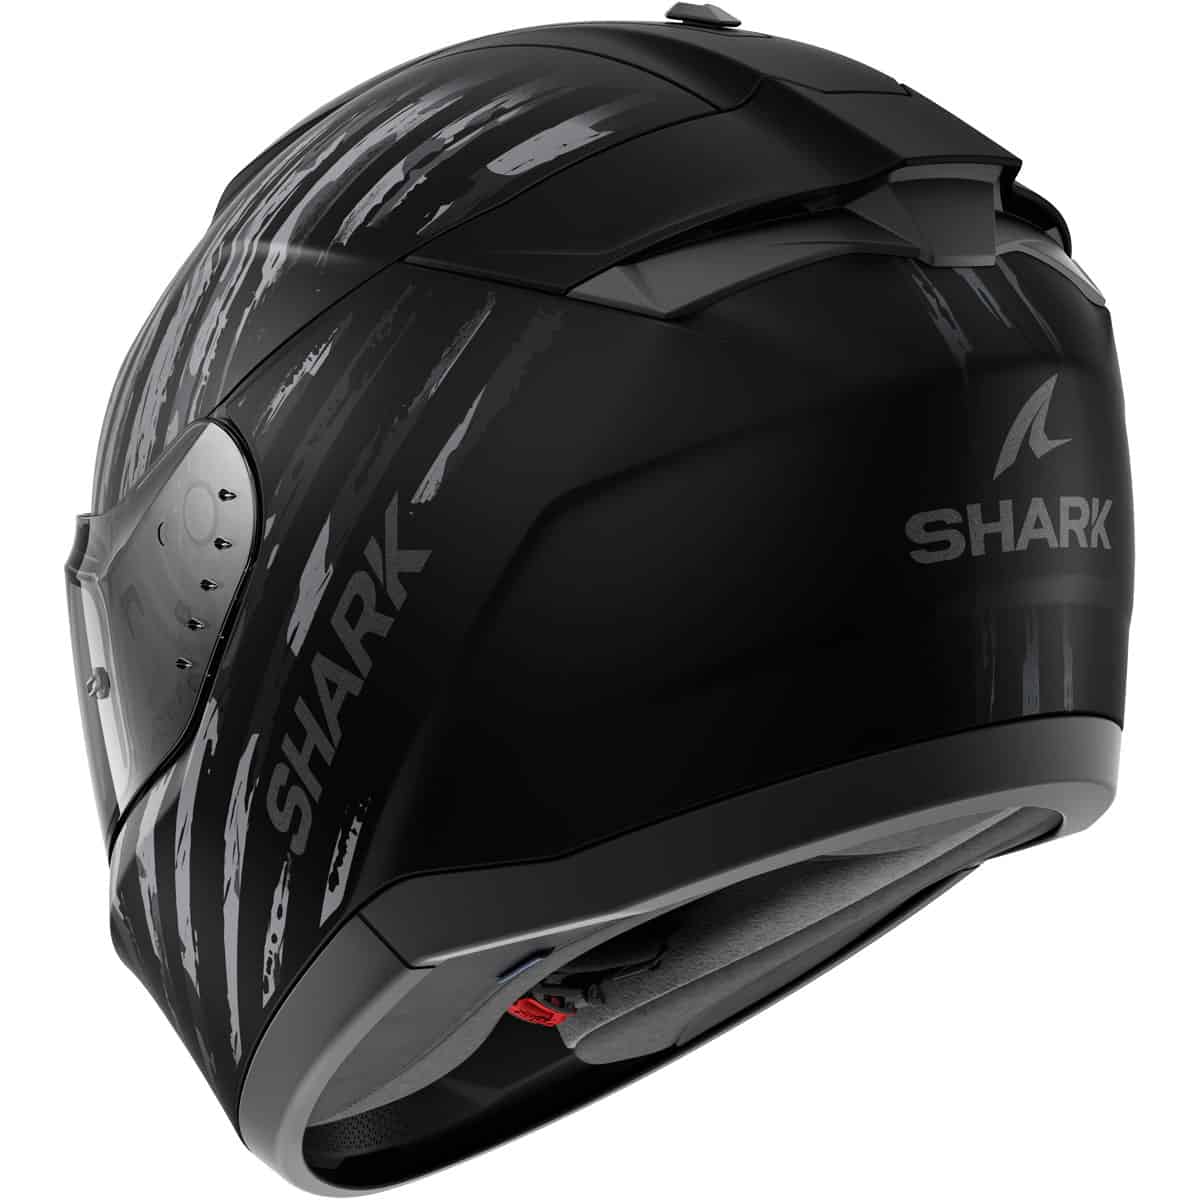 The Shark Ridill 2 helmet takes your safety to the next level. Featuring an all-new design, it marries a streetwear look with advanced features